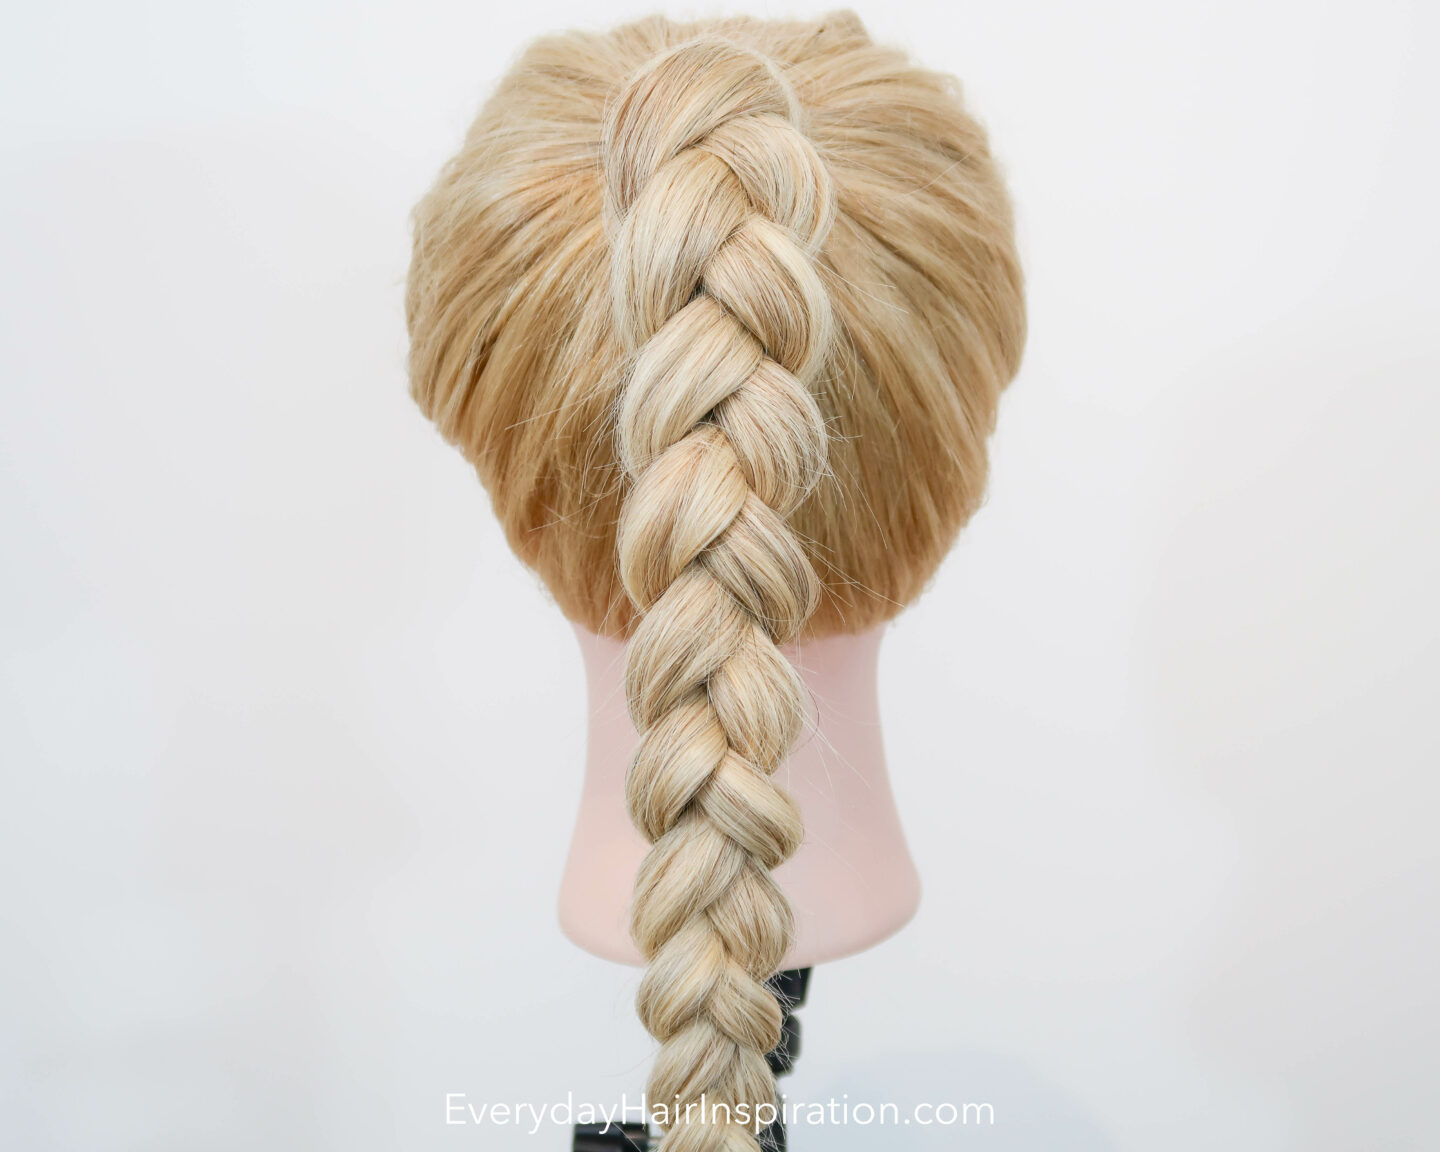 Blonde hairdresser doll seen from the back, with a high ponytail in the hair, with a 3 strand braid, made out of elastics and no braiding.